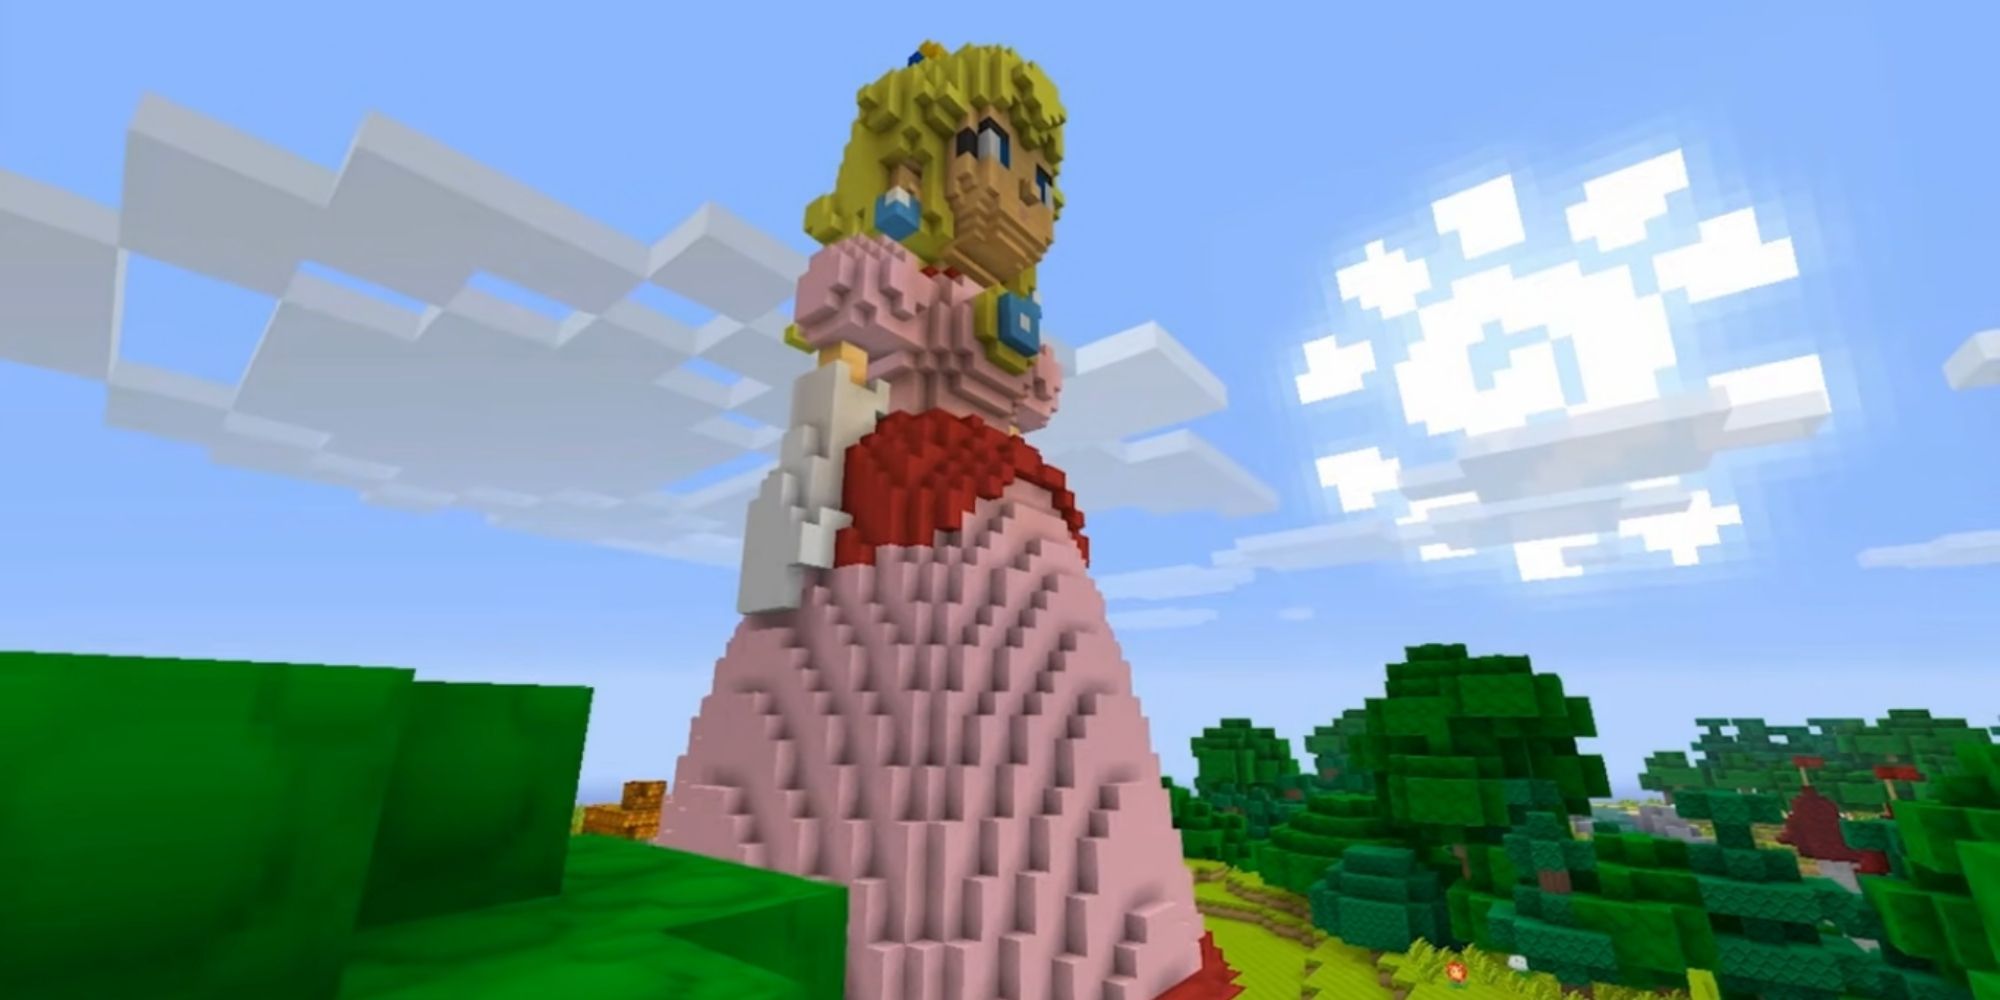 A giant Princess Peach stands in the woods on a clear day